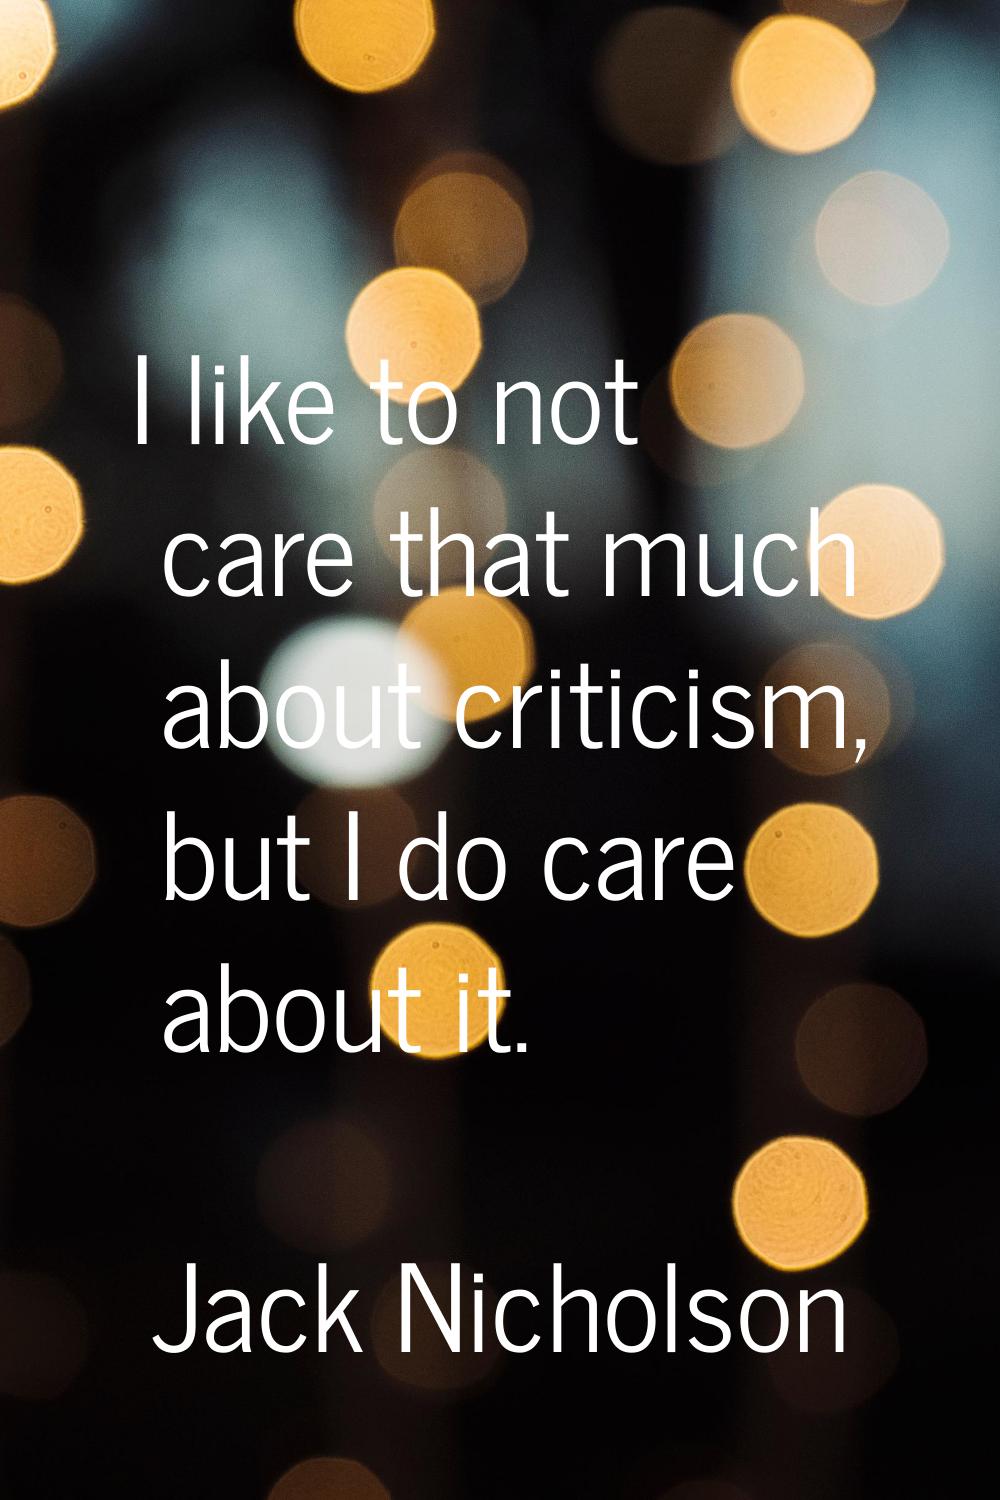 I like to not care that much about criticism, but I do care about it.